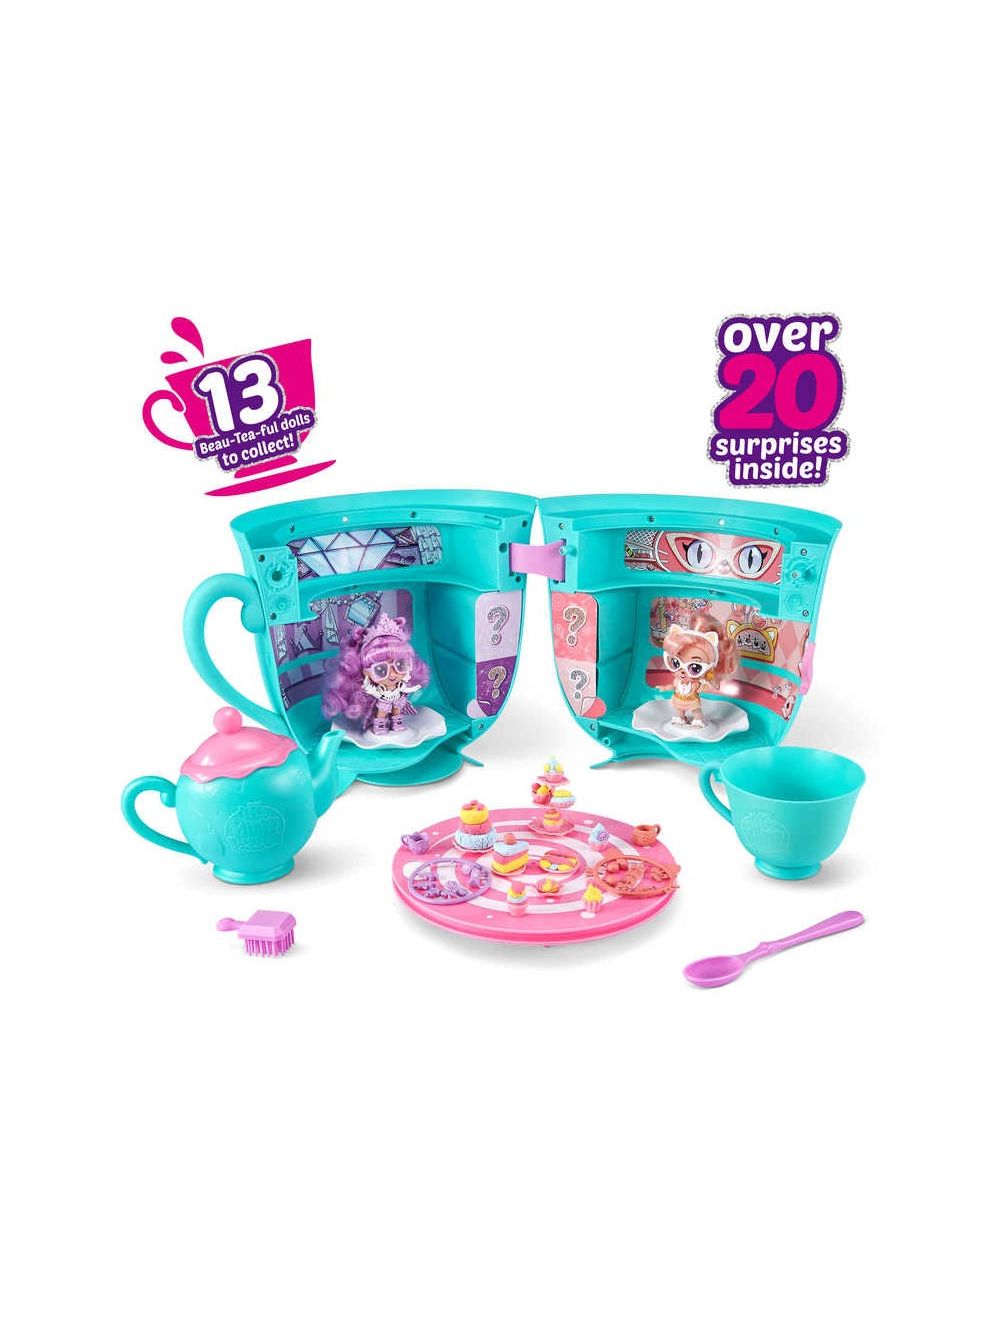 Itty Bitty Prettys tea party surprise S2